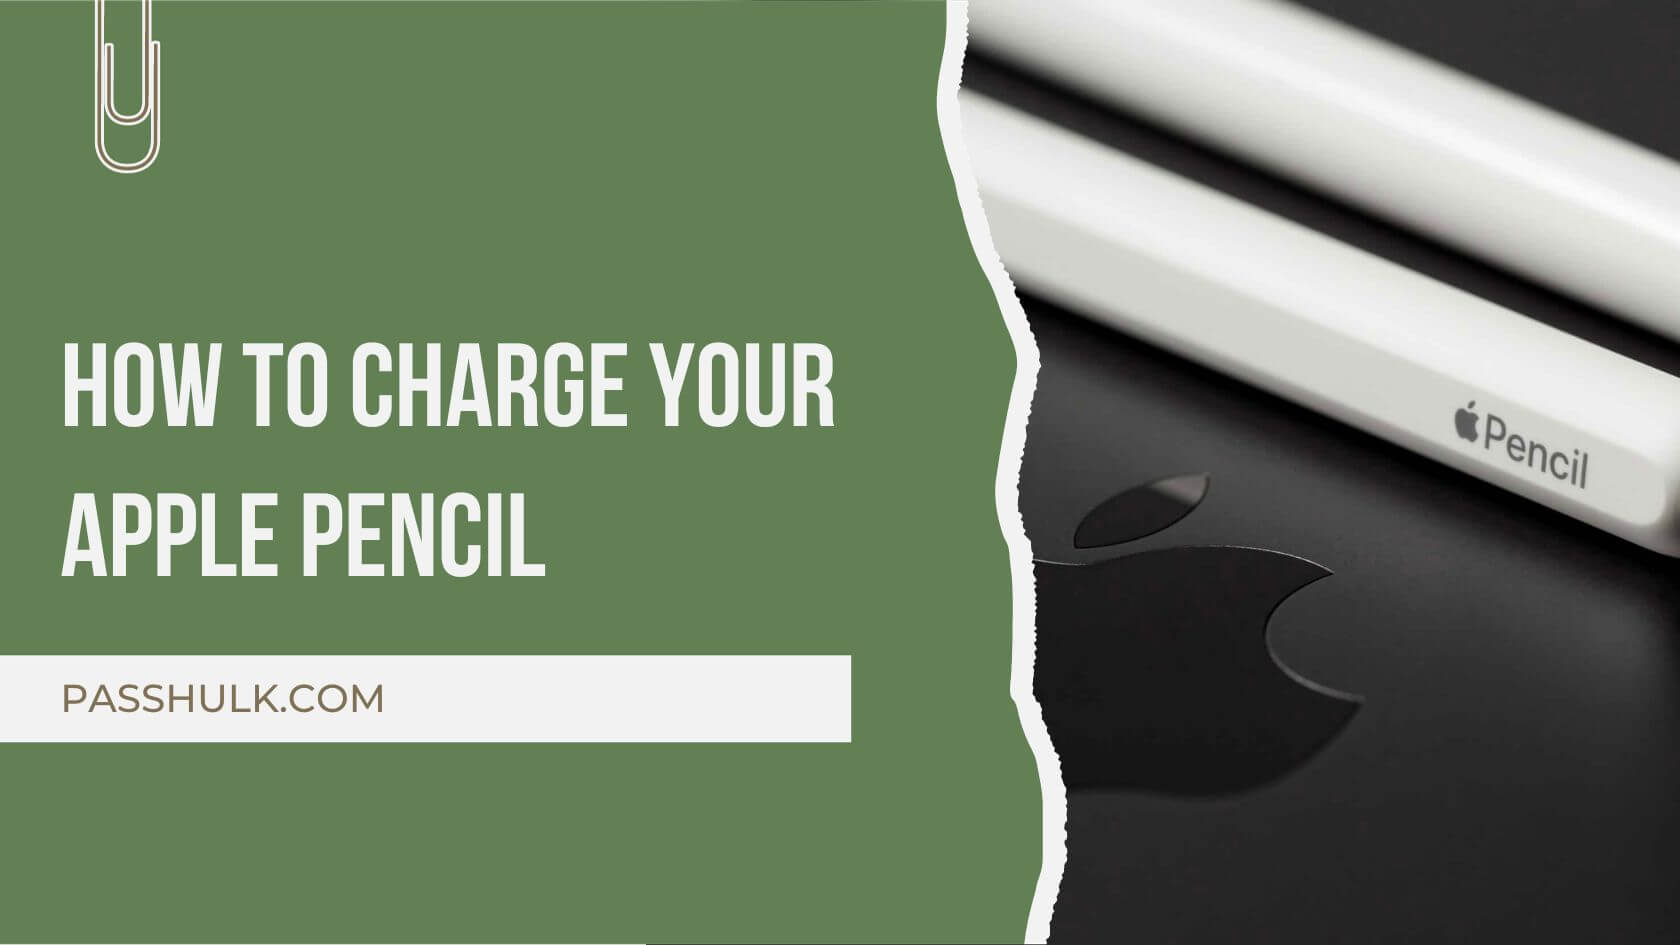 How to Charge Your Apple Pencil – Detailed Guide